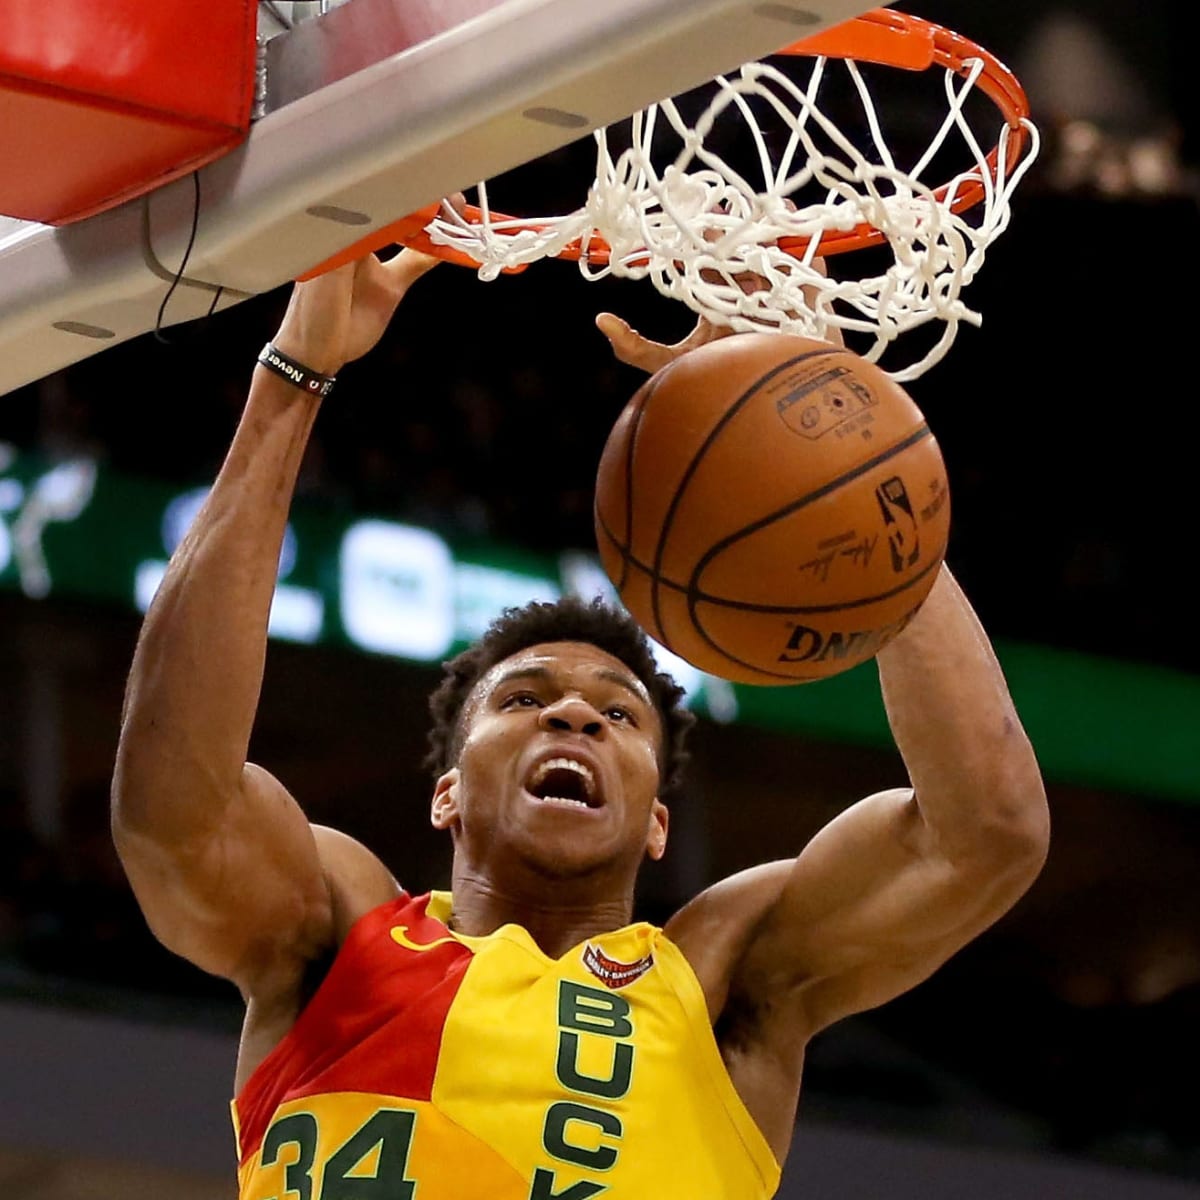 Video: Giannis Antetokounmpo holds Lakers jersey with his last name -  Silver Screen and Roll